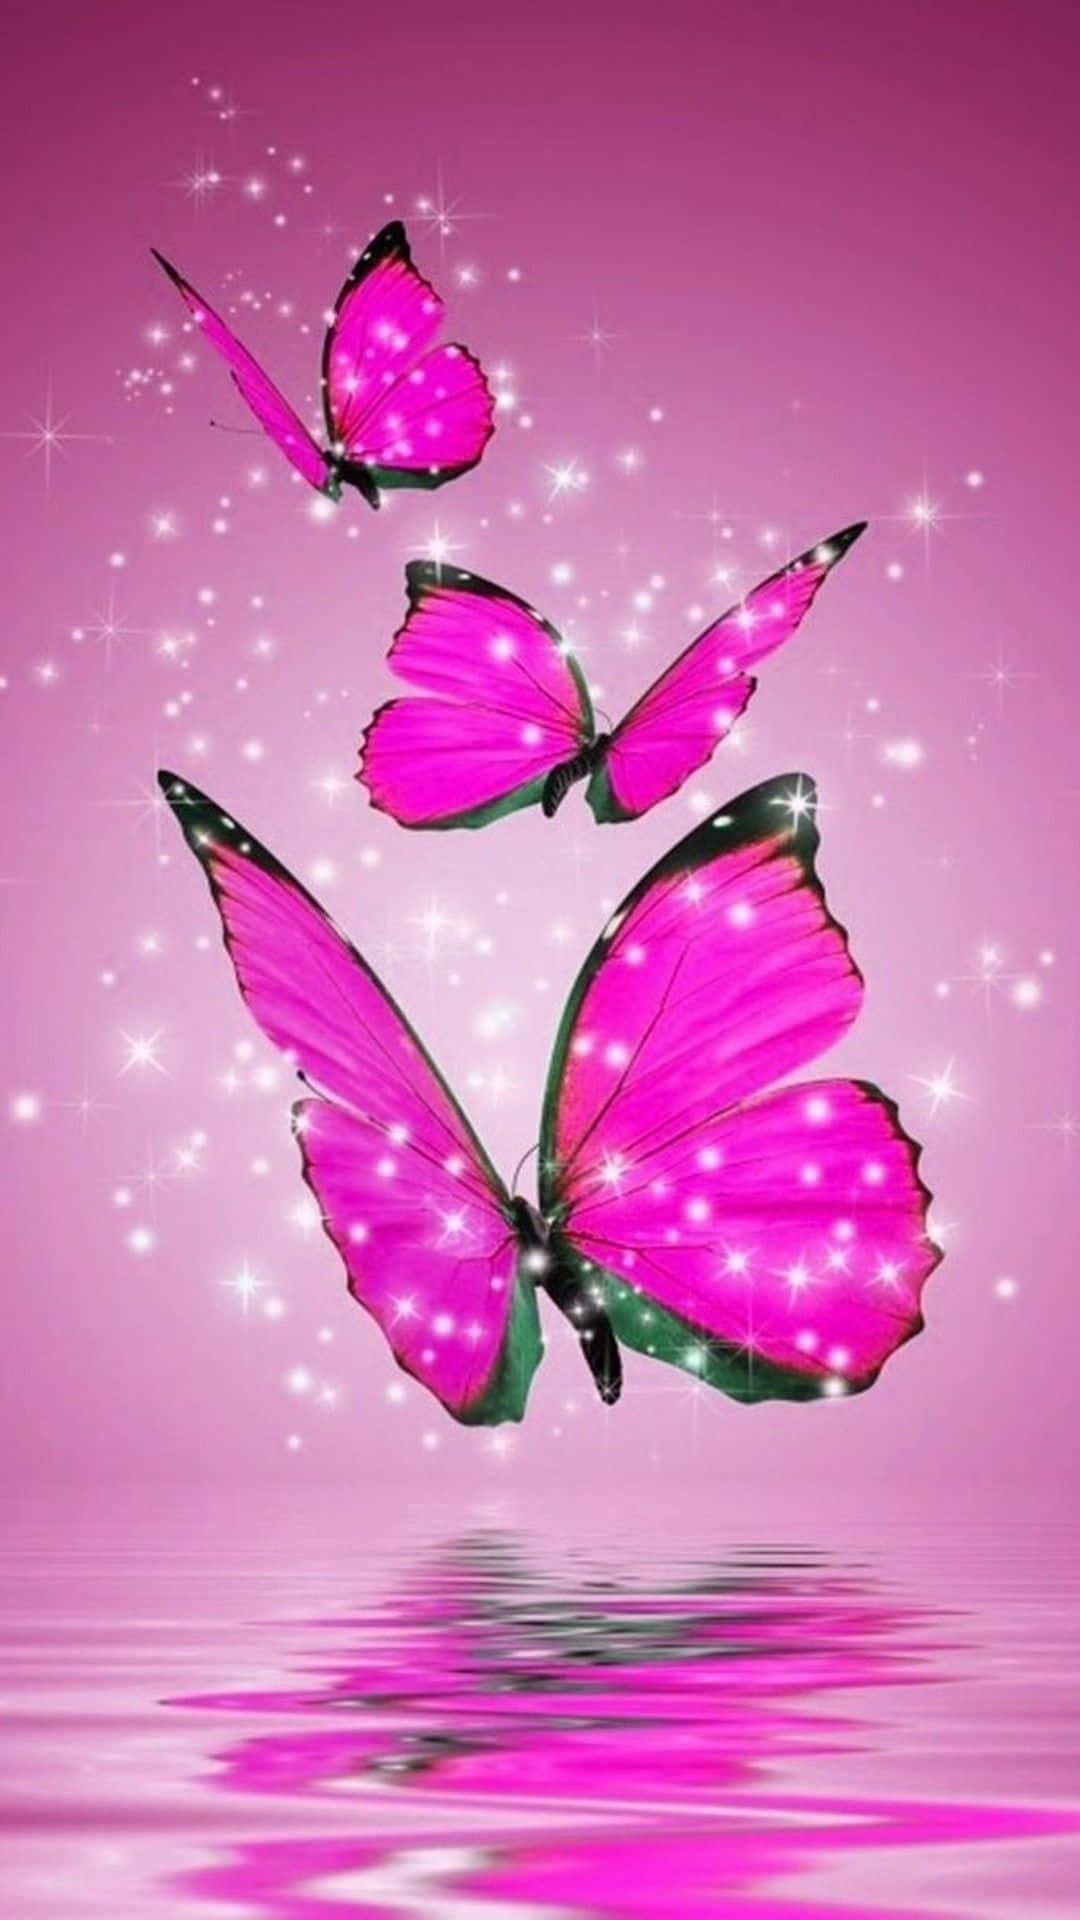 Baddie Pink Wallpapers - Wallpaper Cave F8A  Butterfly wallpaper, Pink glitter  wallpaper, Butterfly wallpaper iphone